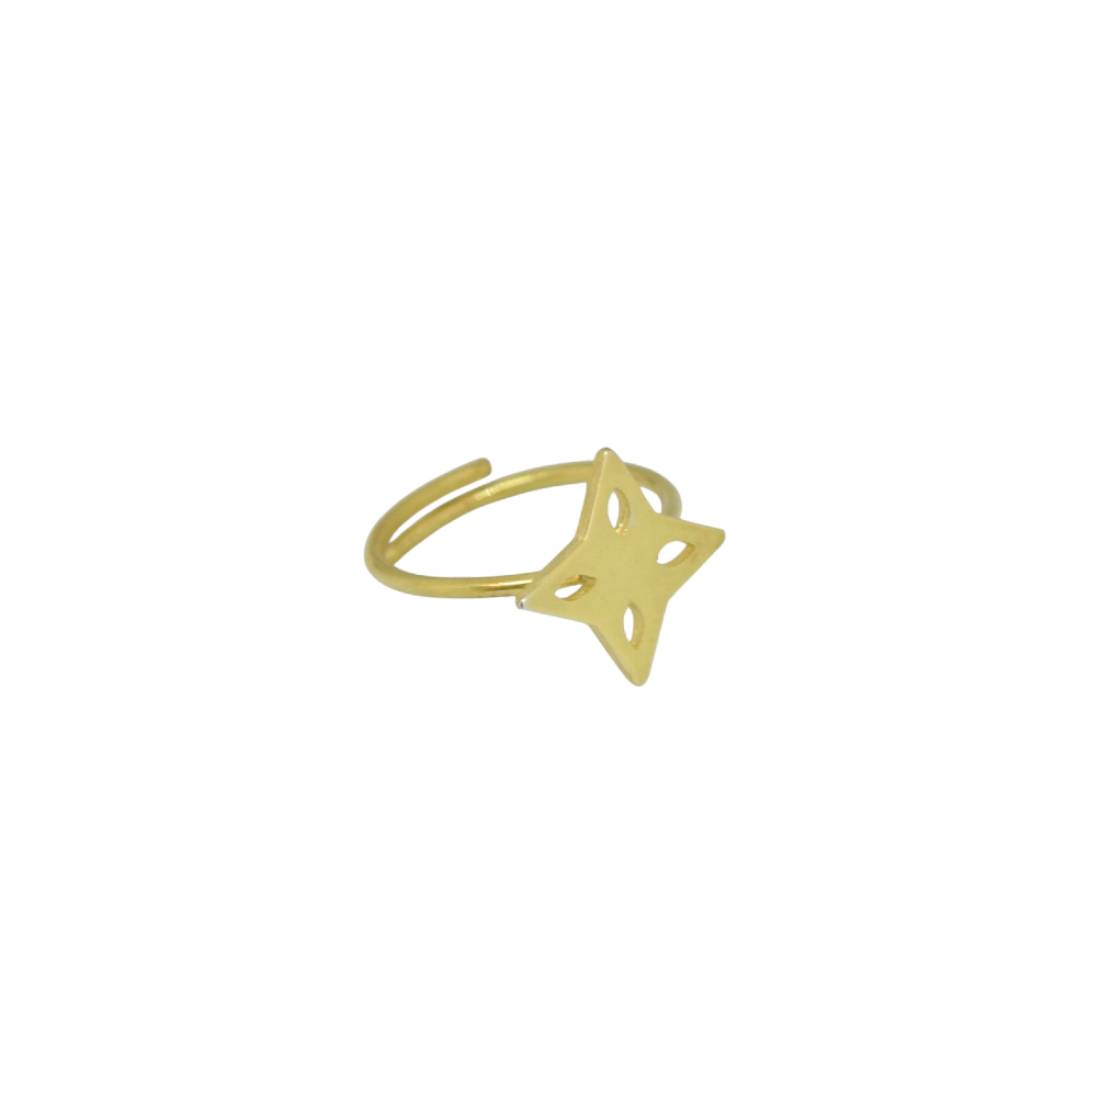 Rising star II gold plated ring